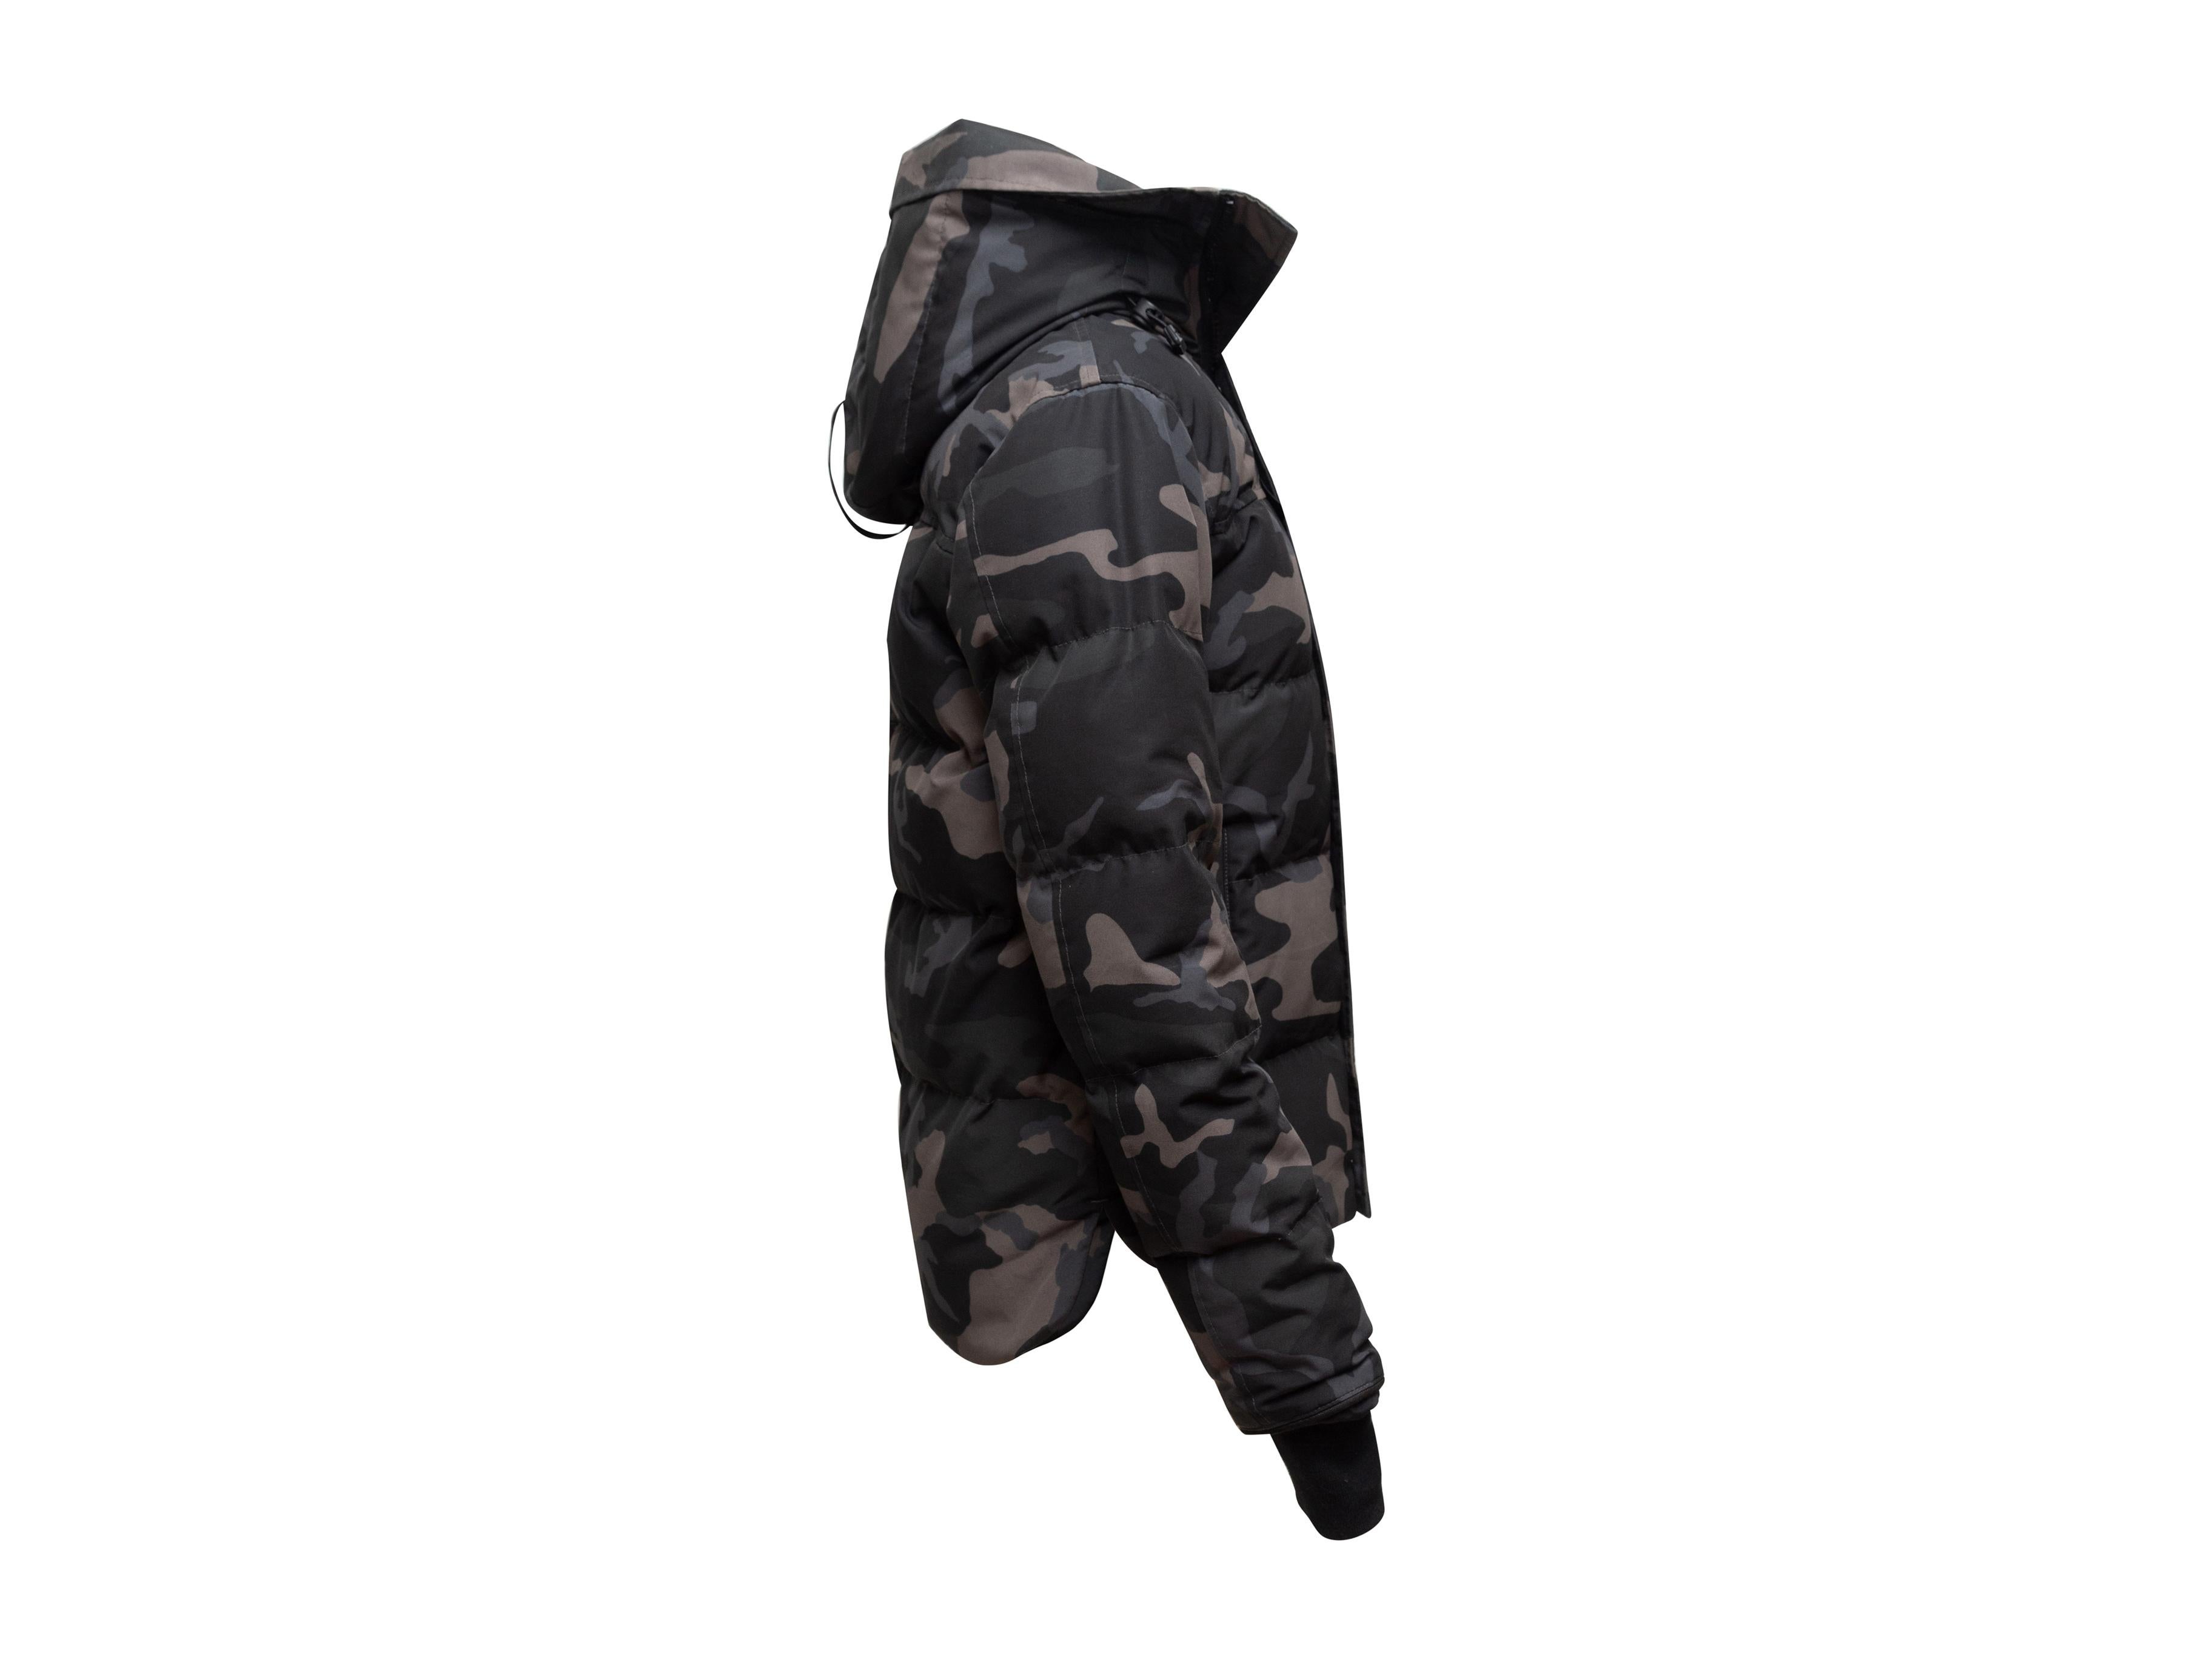 Product details: Grey and black hooded down puffer jacket by Canada Goose. Camo print throughout. Dual hip pockets. Concealed zip closure at front. 32